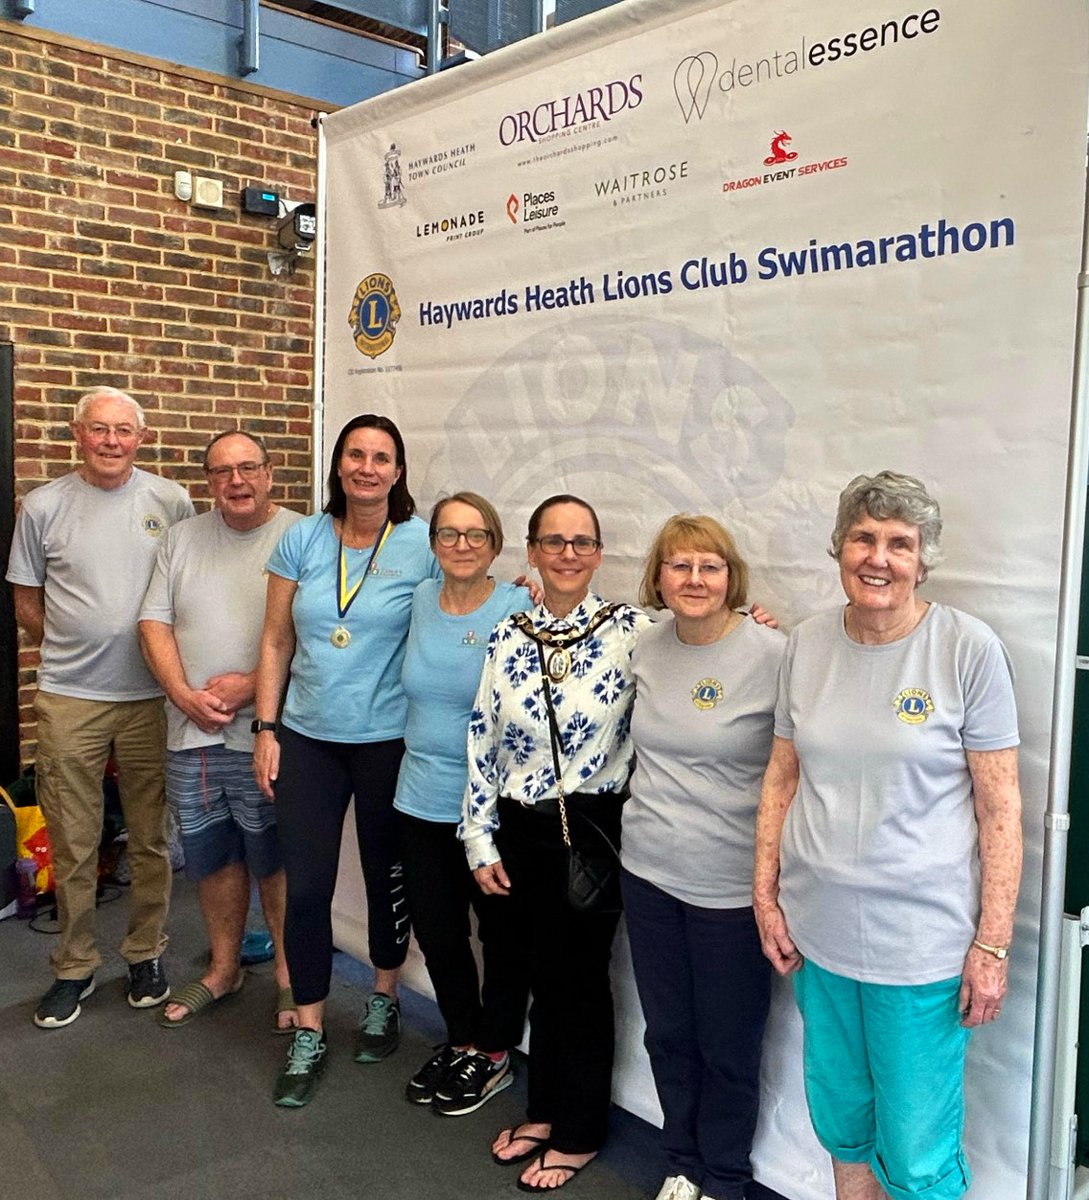 The Mayor was delighted to join the Haywards Heath @lionsclubs at their Swimarathon as they raised almost £20,000 for local charities! 'I am in awe of this Lions event, overwhelmed by the generosity of the donors, & so grateful for all the wonderful people who participated .' 👏